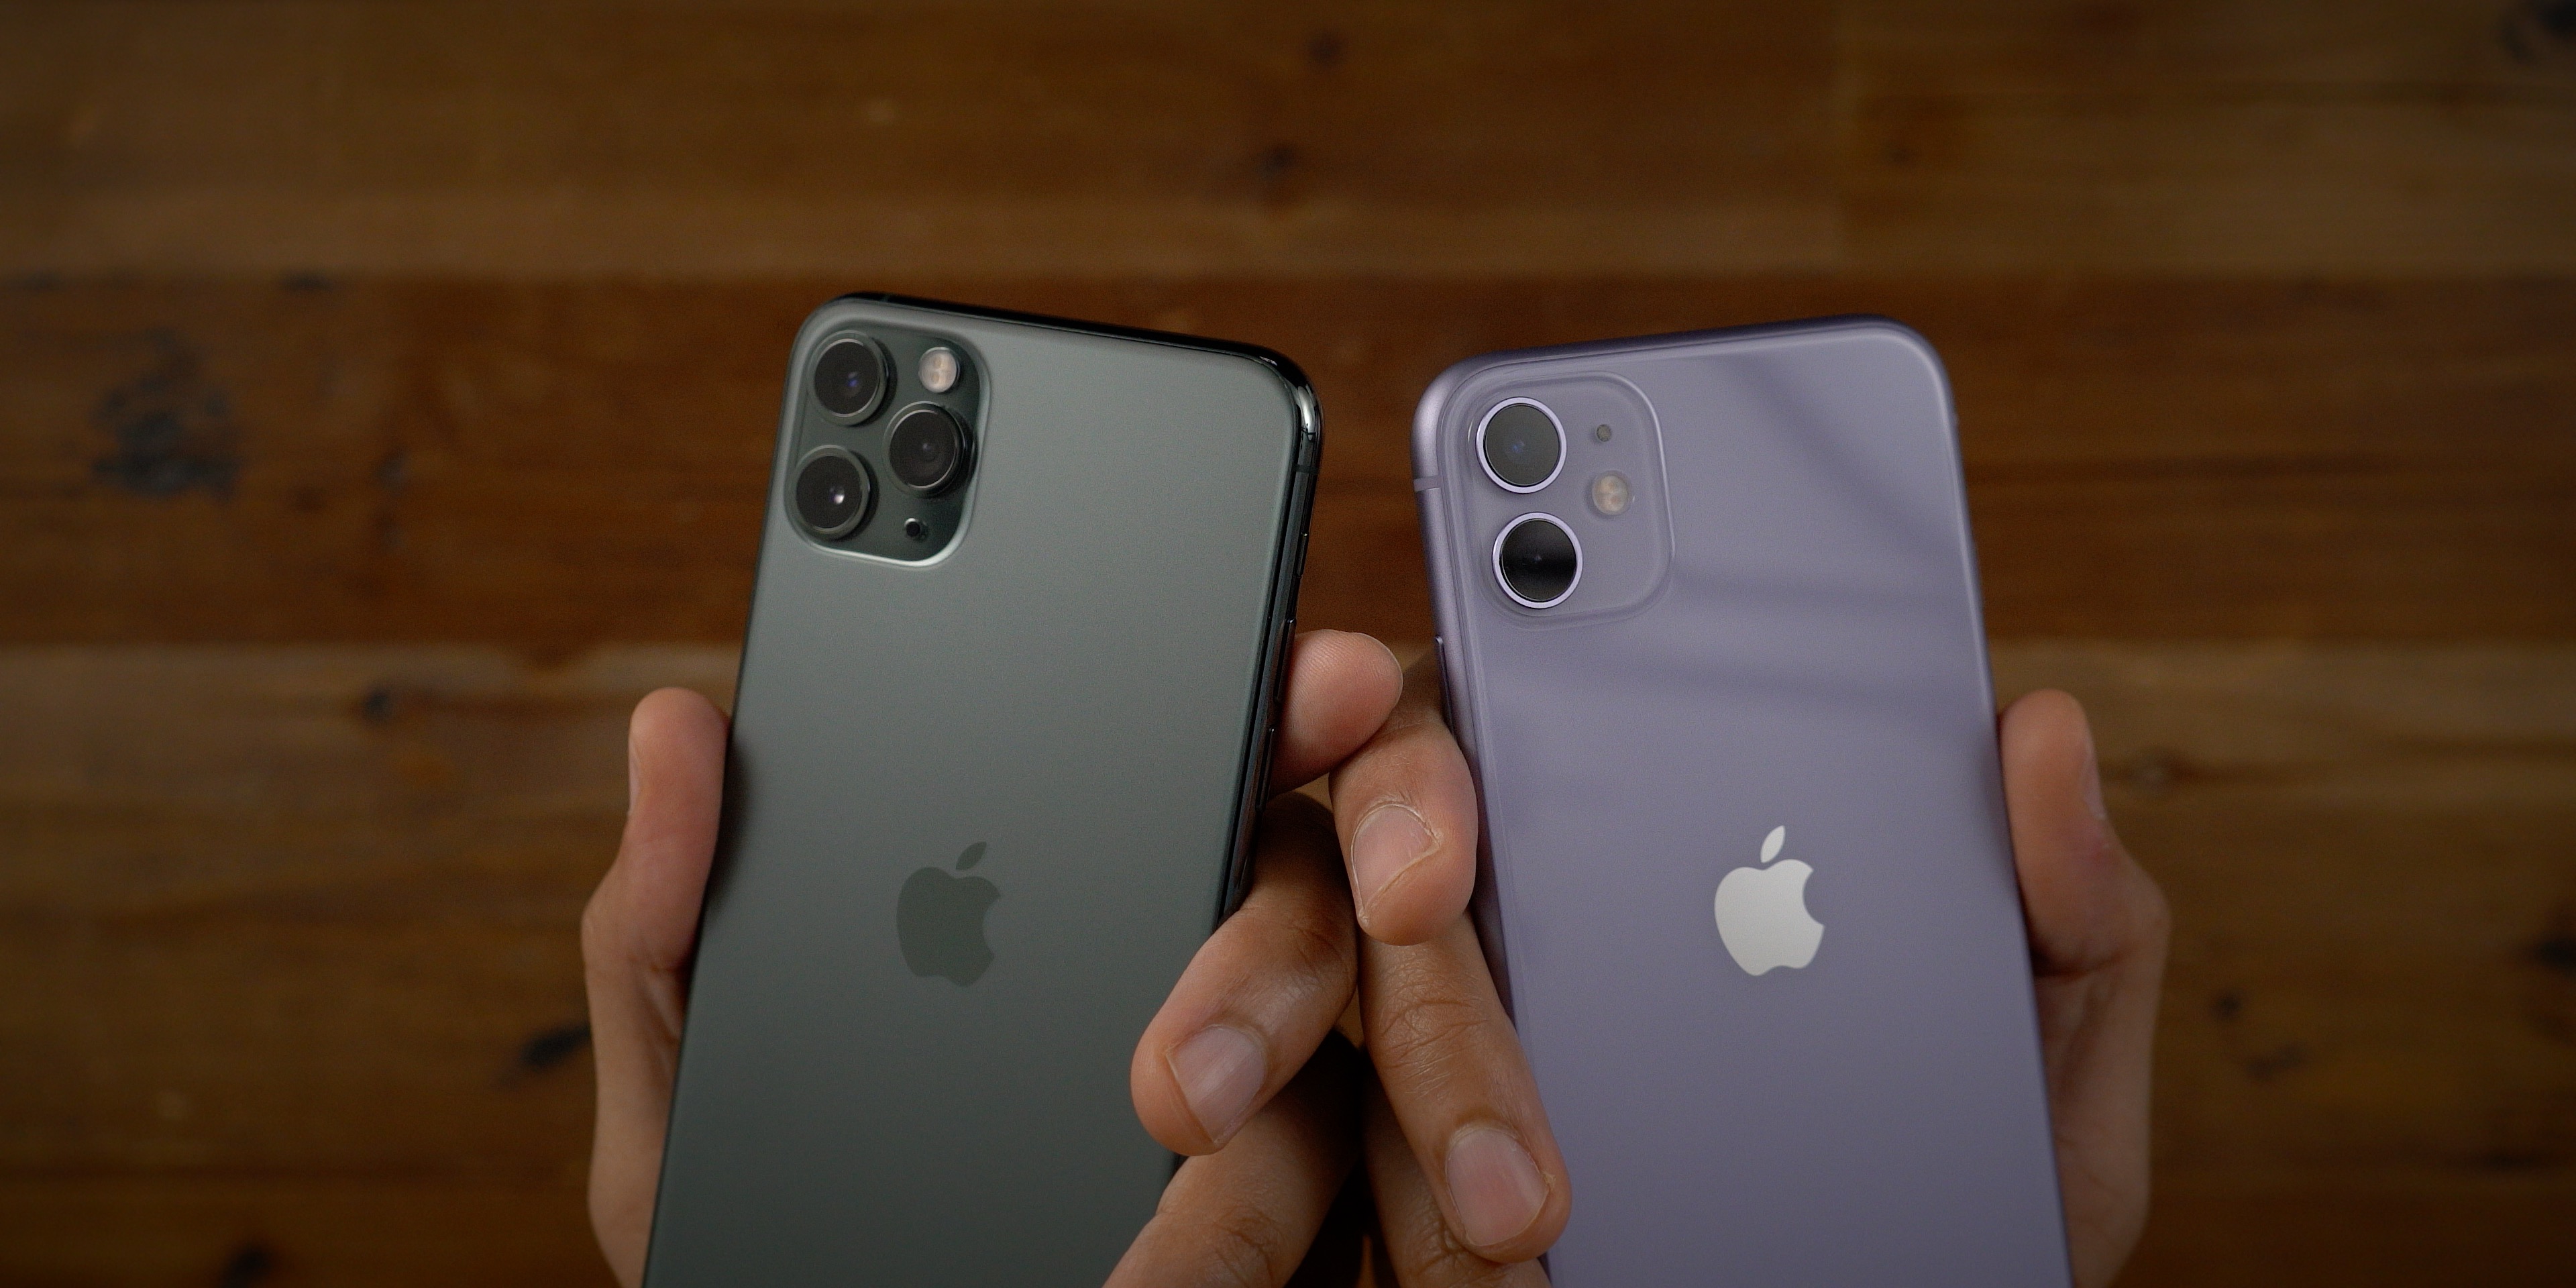 iPhone 11 Pro review is it worth the significant price premium? 9to5Mac